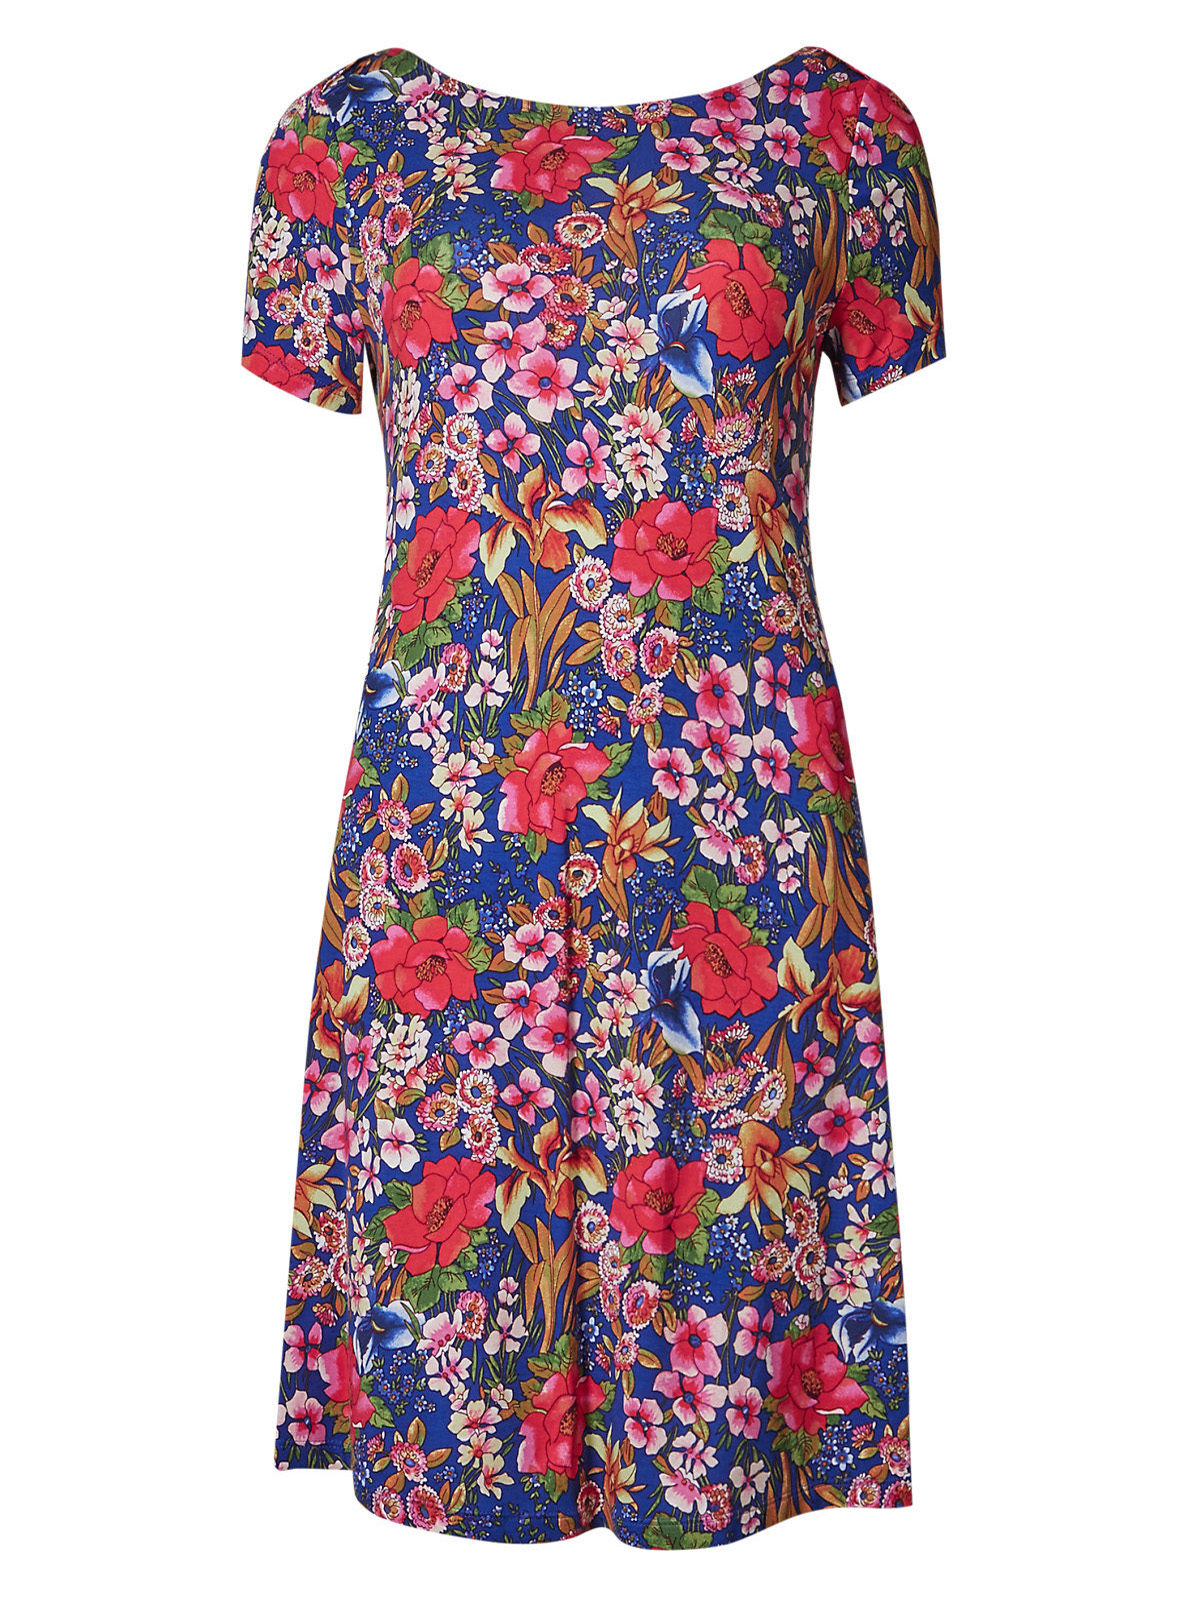 Marks and Spencer - - M&5 ASSORTED Floral Print Swing Dresses - Size 6 ...